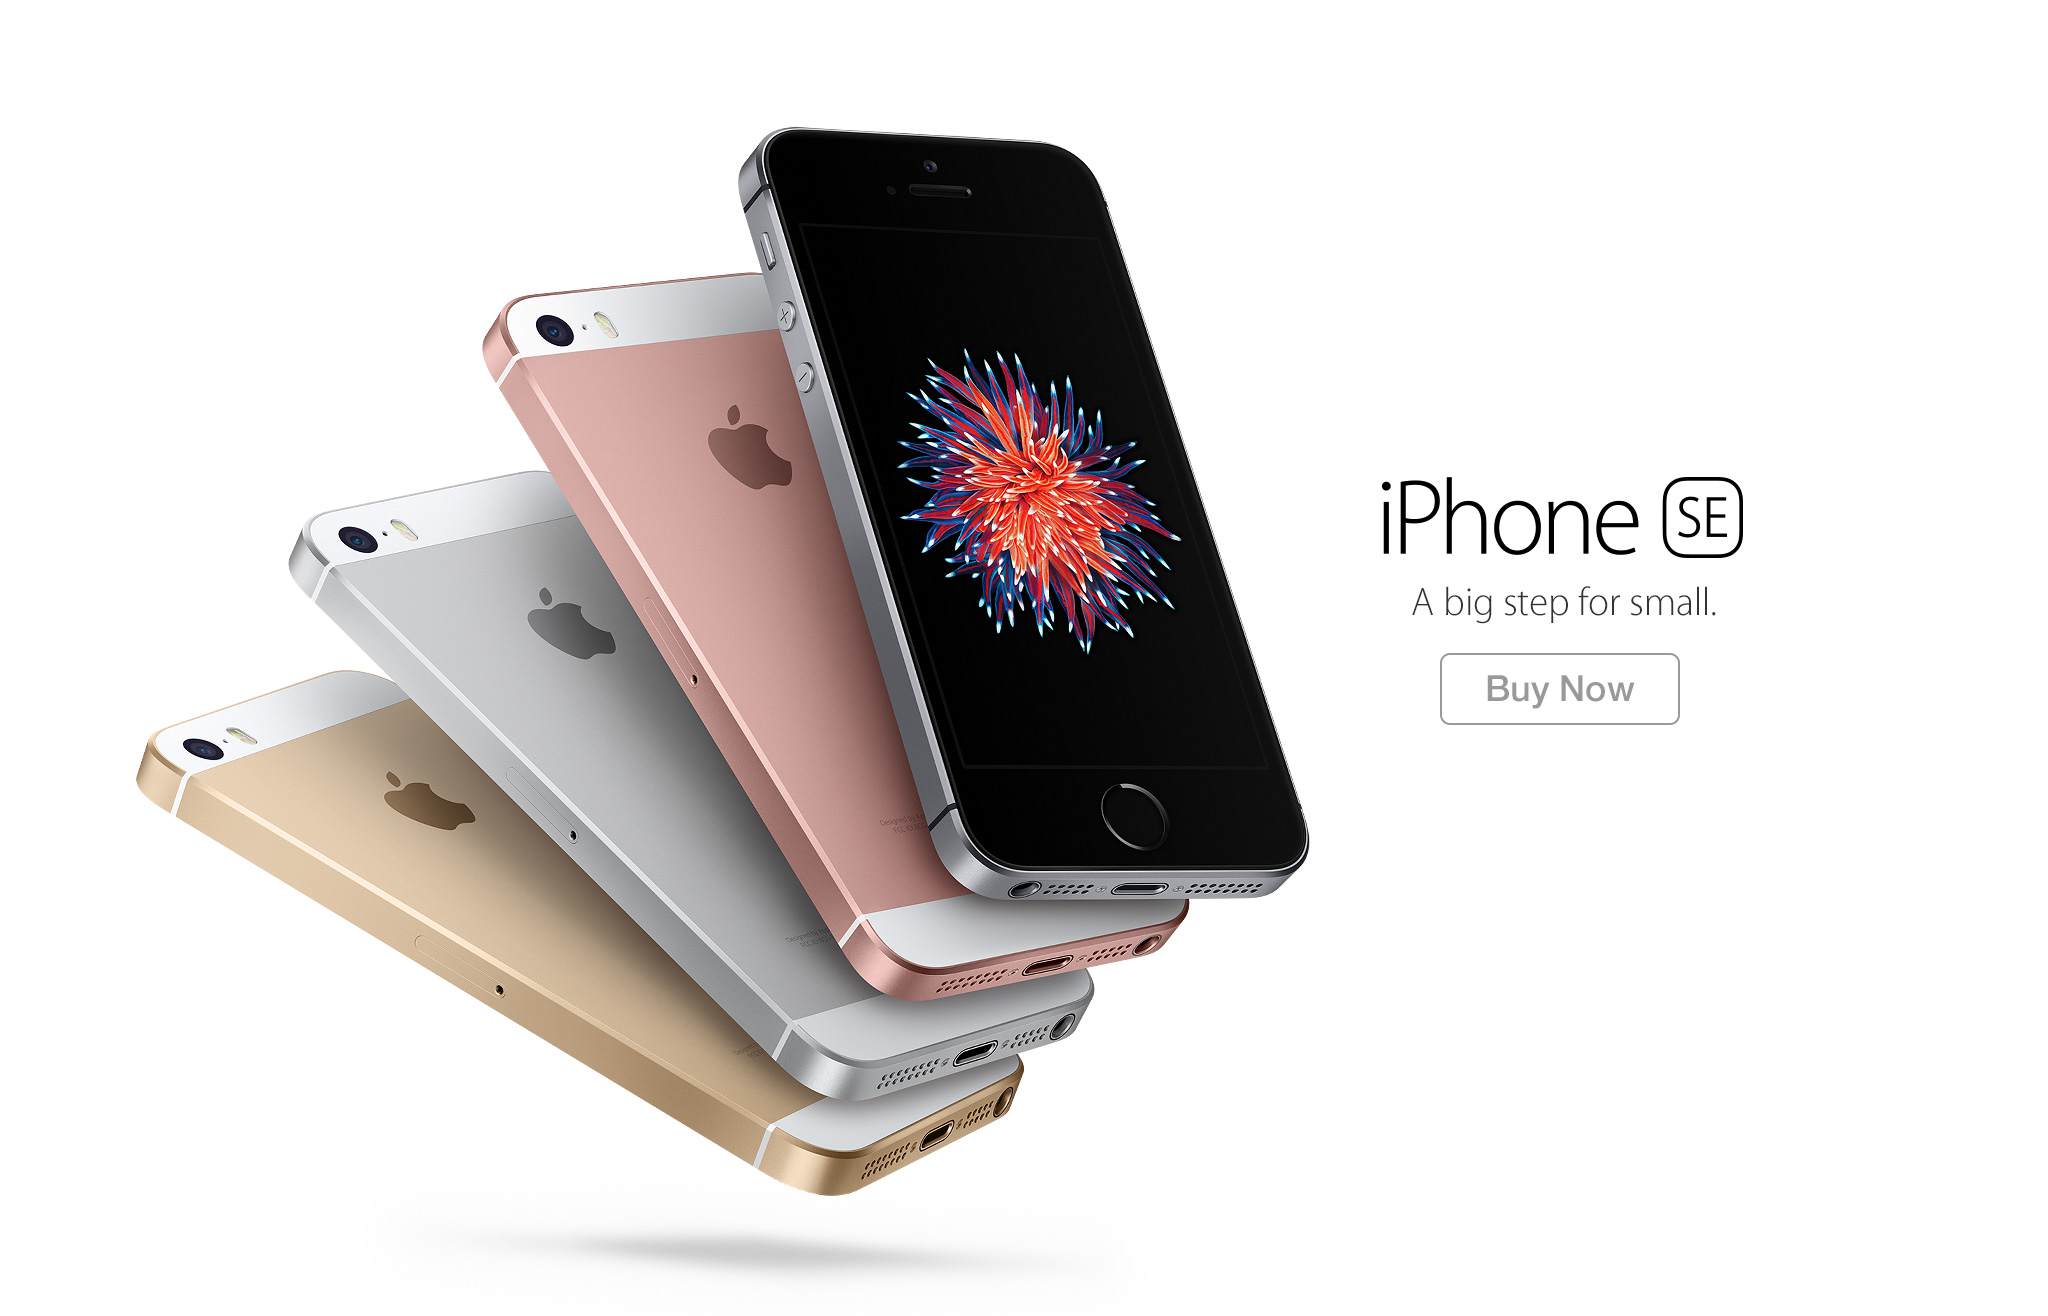 iPhone SE Learn More